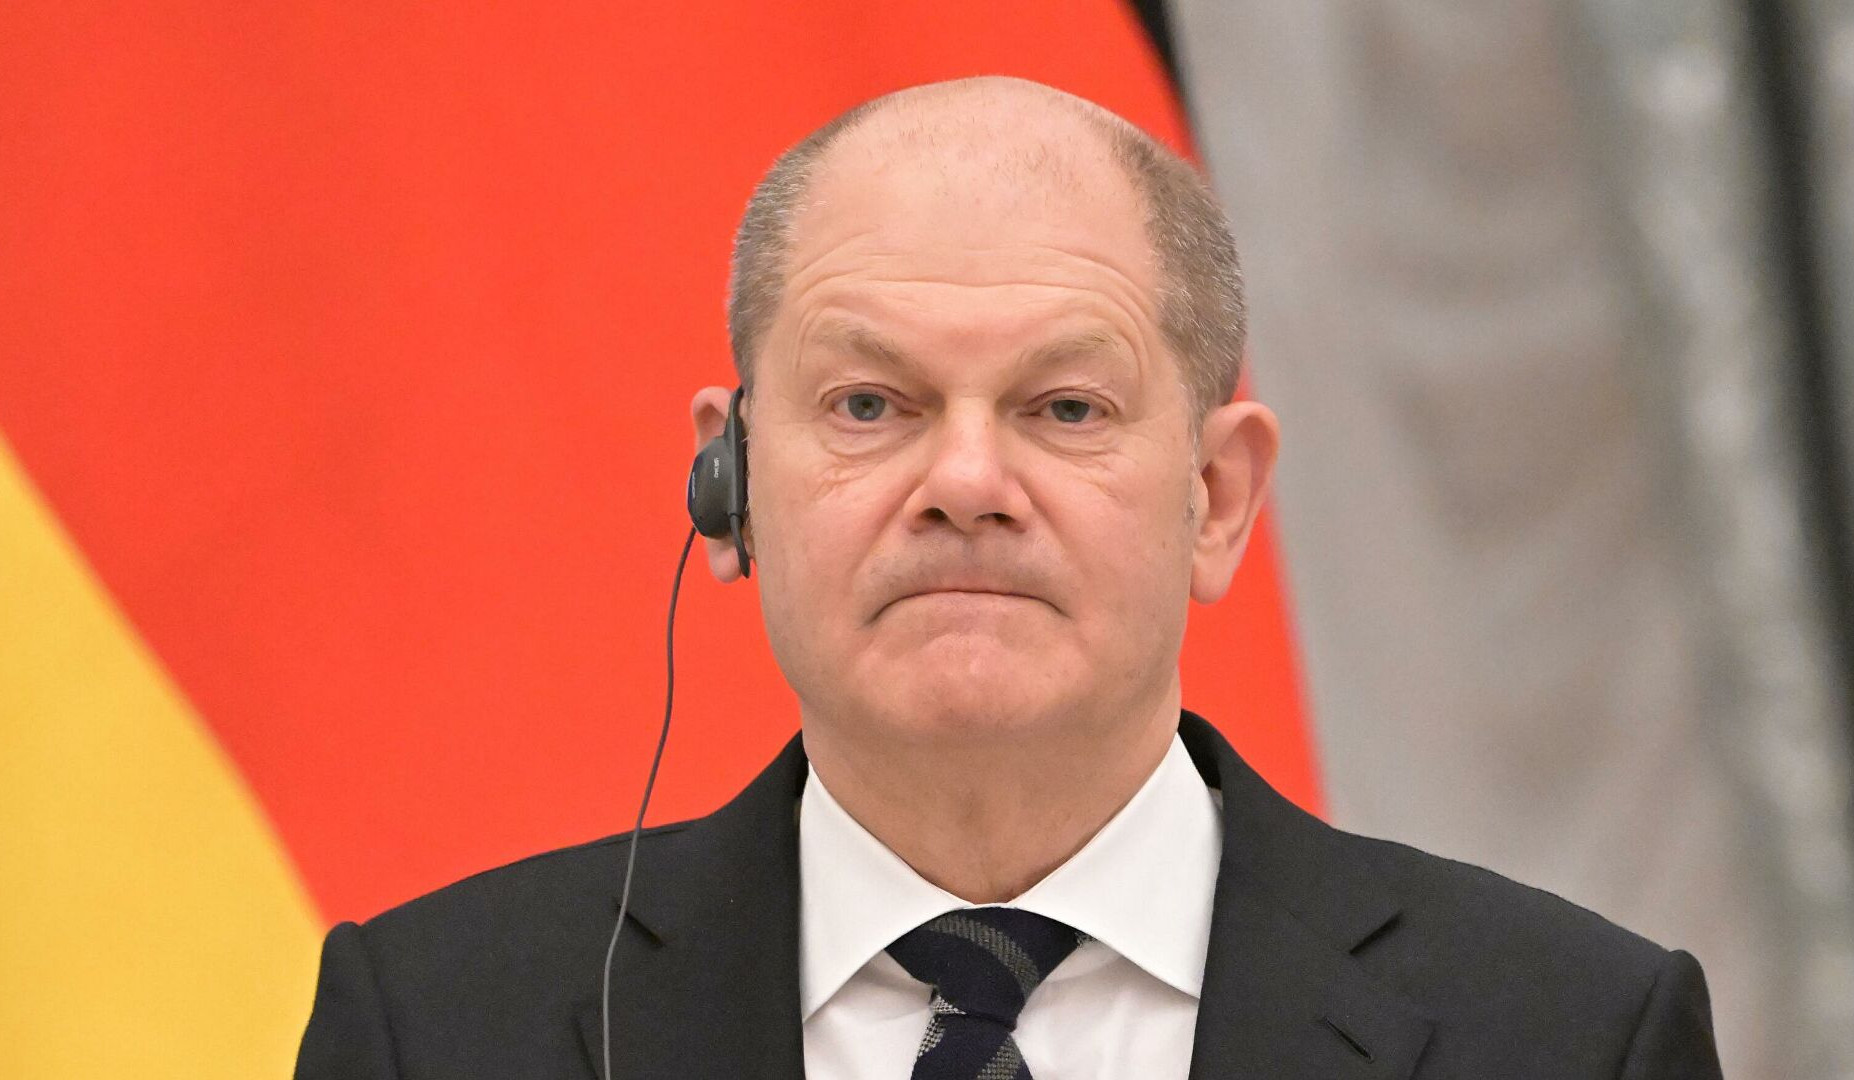 Germany to continue to coordinate military assistance with Ukraine to its allies: Scholz